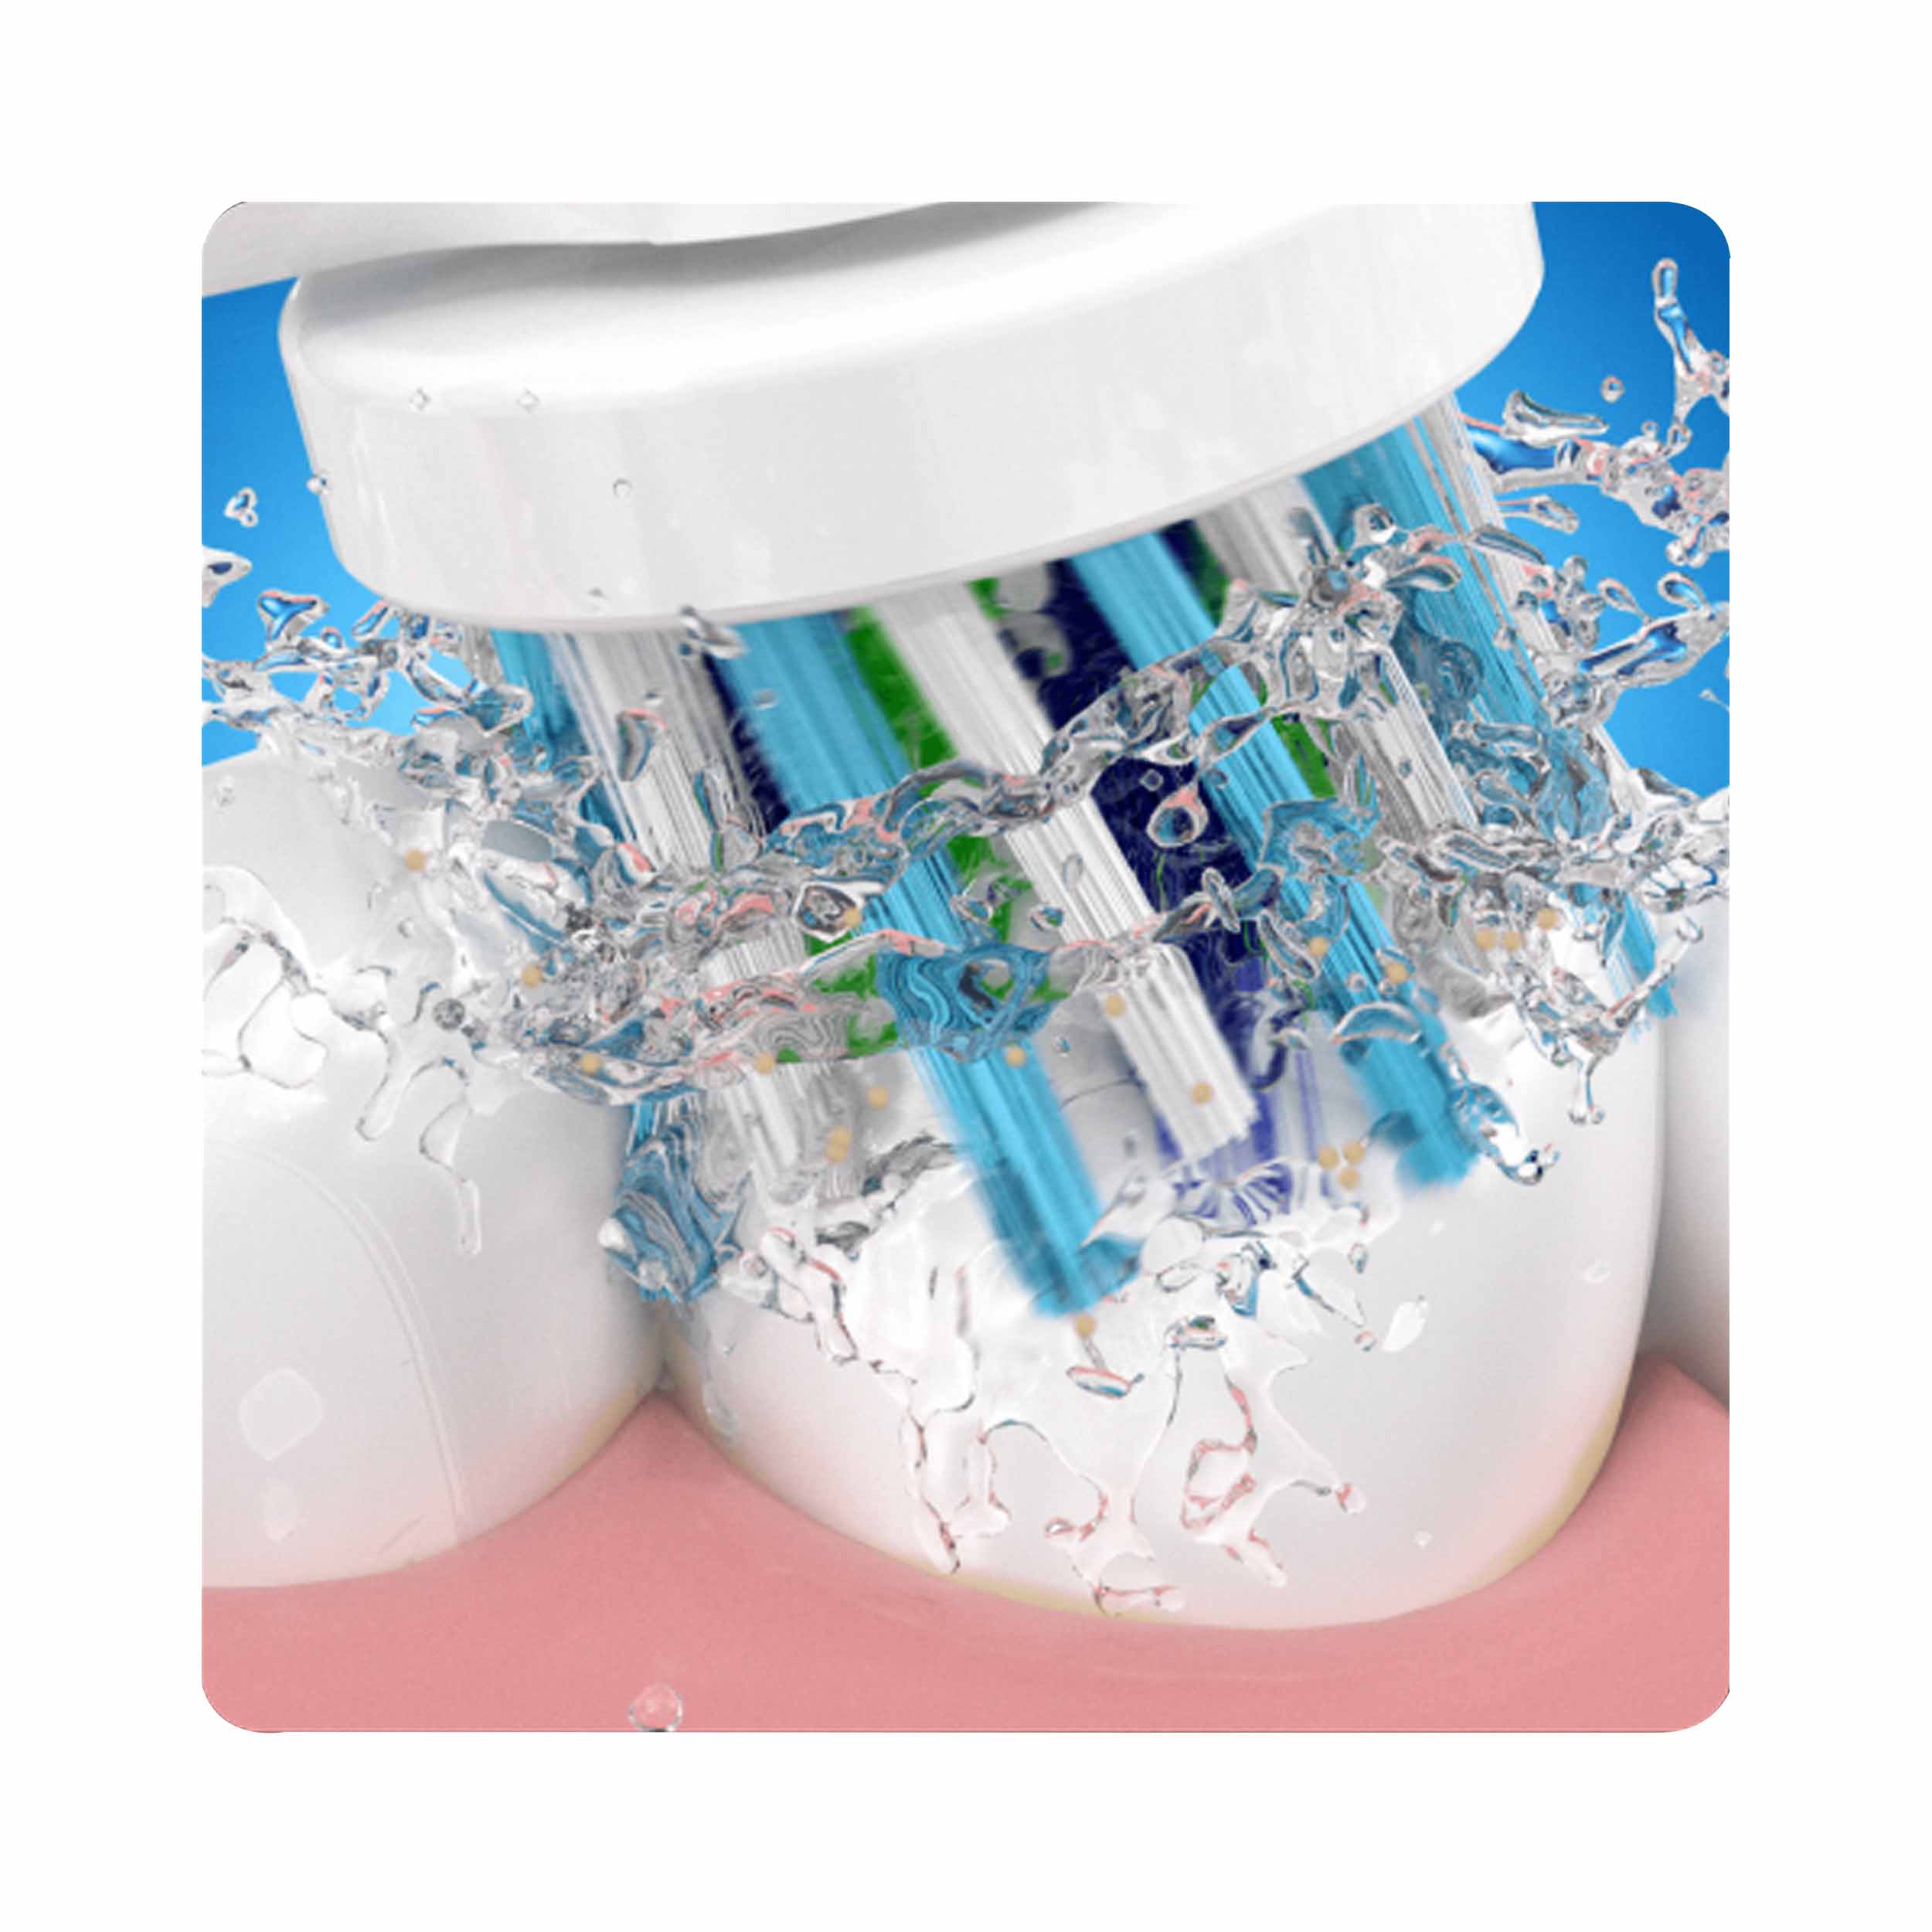 ORAL-B Electric Rechargeable Tooth Brush